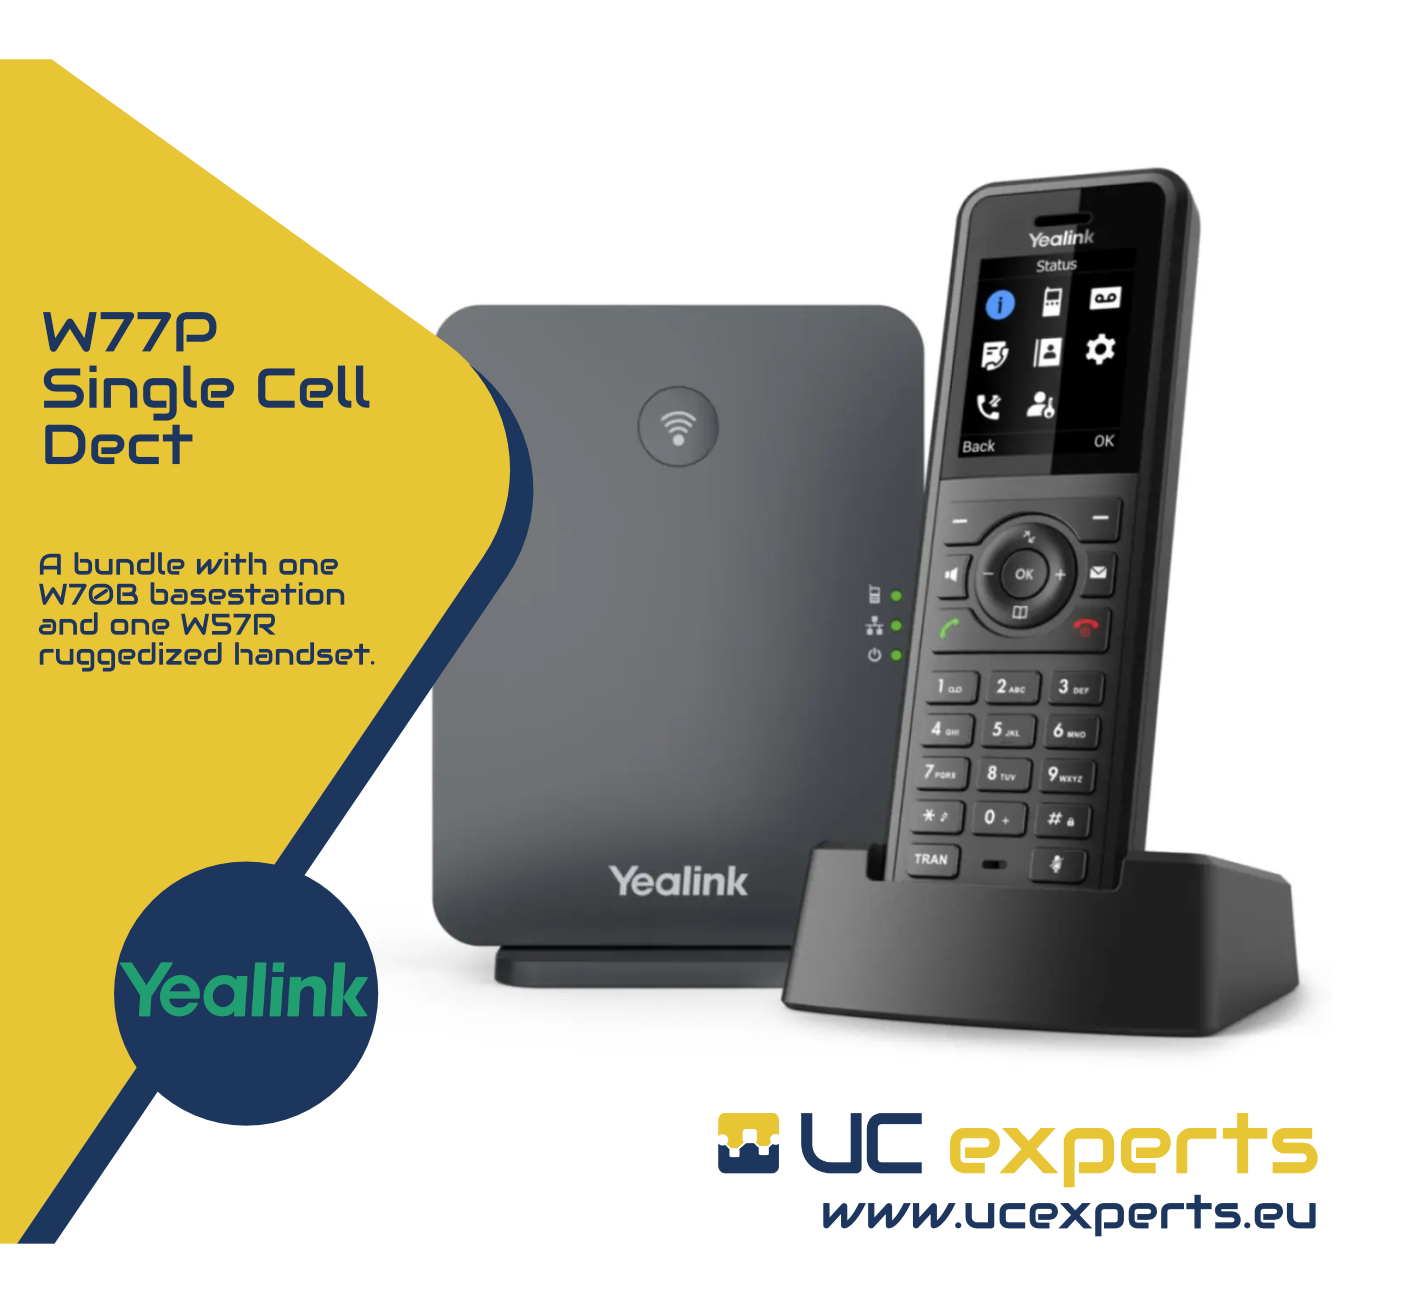 The Yealink W77P, a high-performance ruggedized SIP cordless phone system 